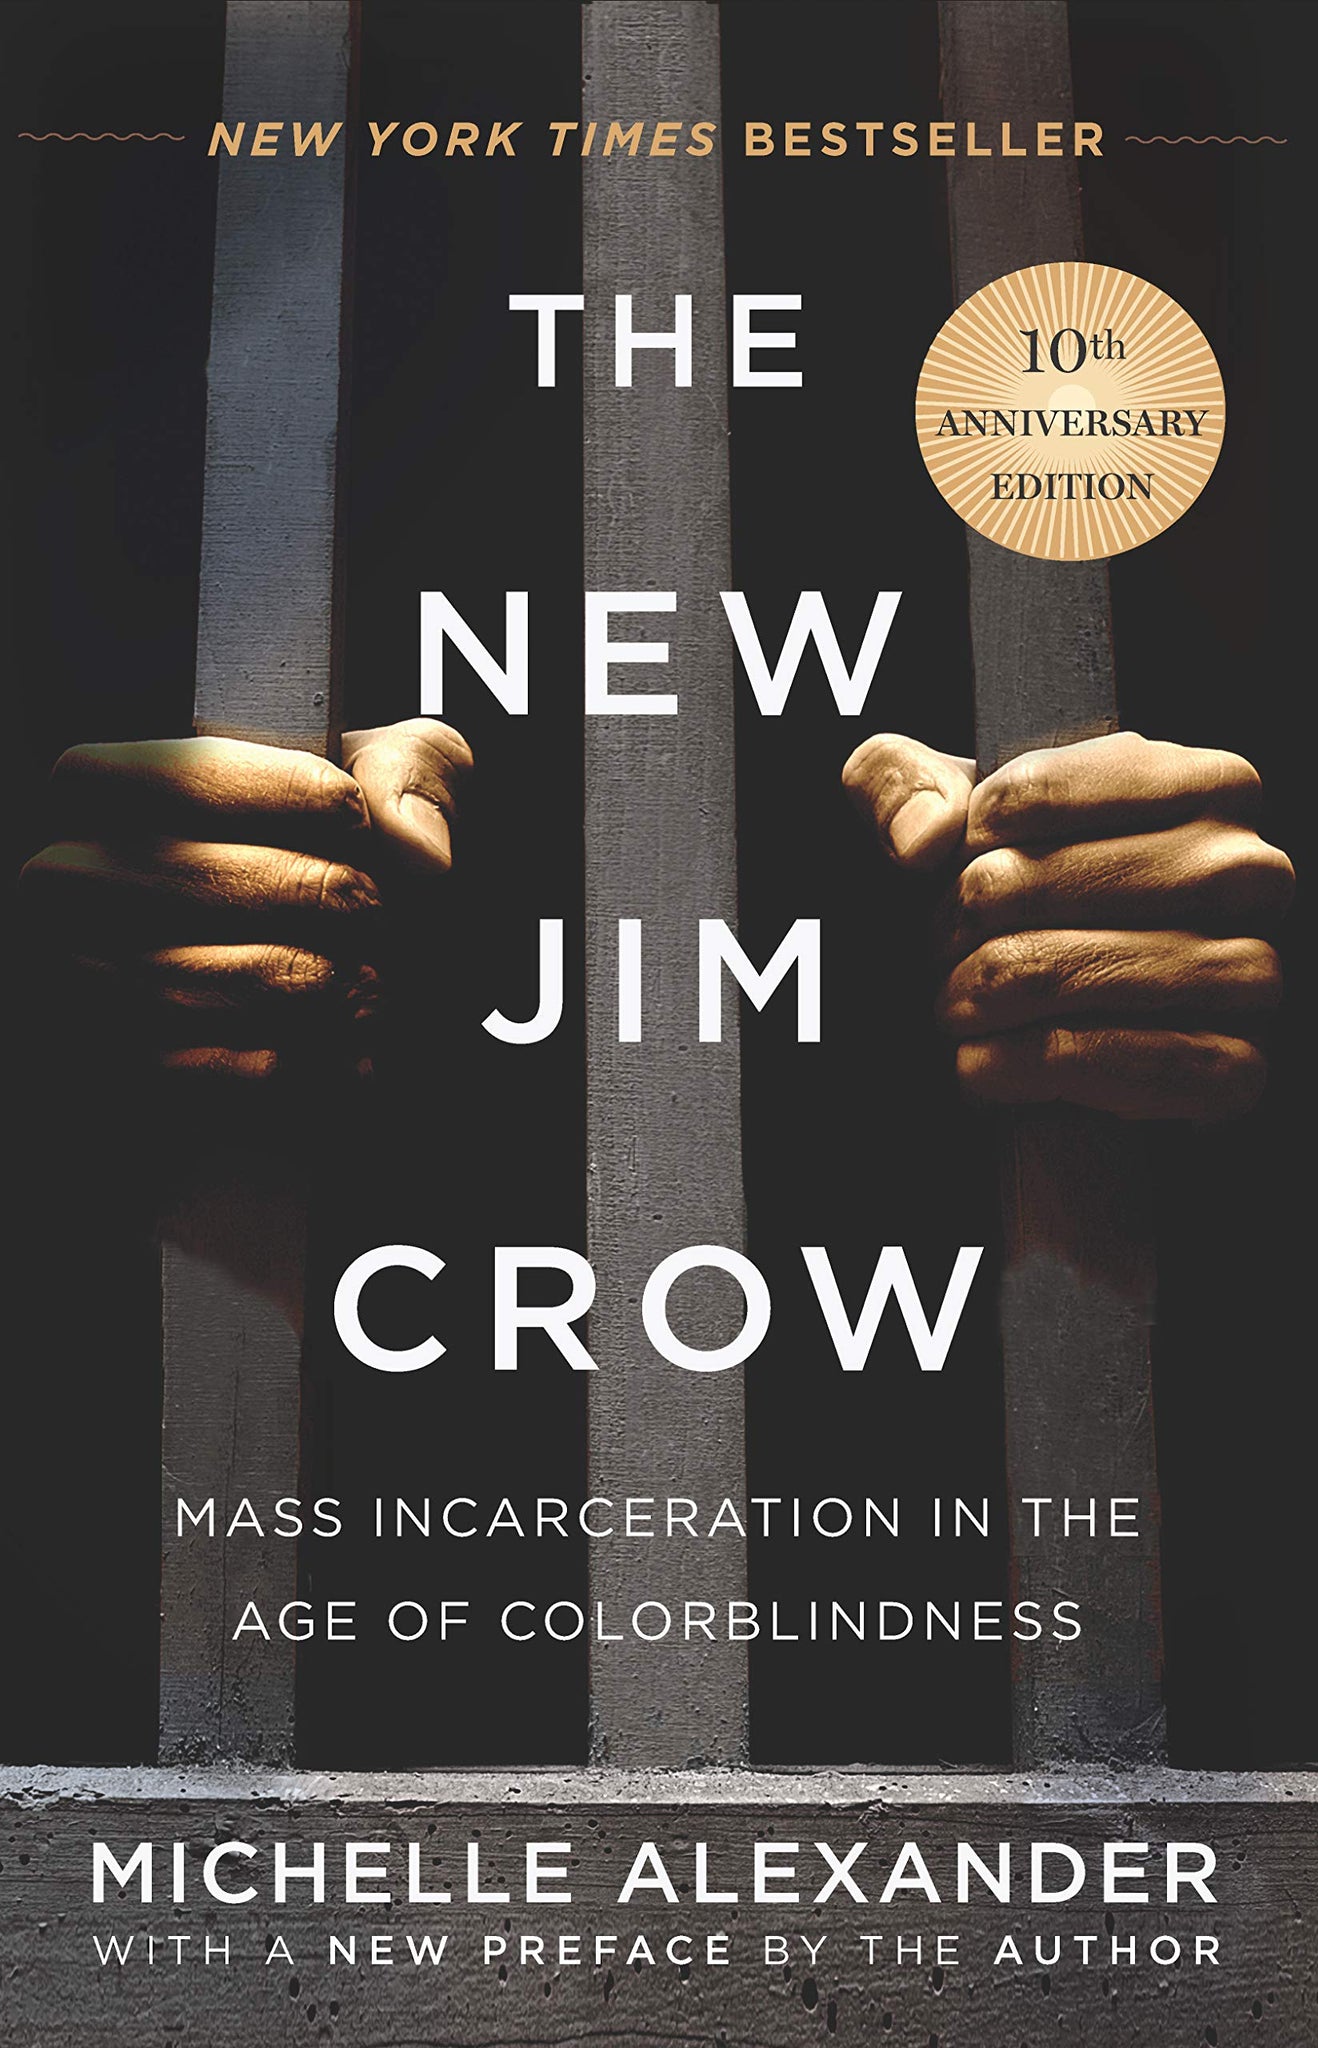 The New Jim Crow: Mass Incarceration in the Age of Colorblindness (Hardcover)